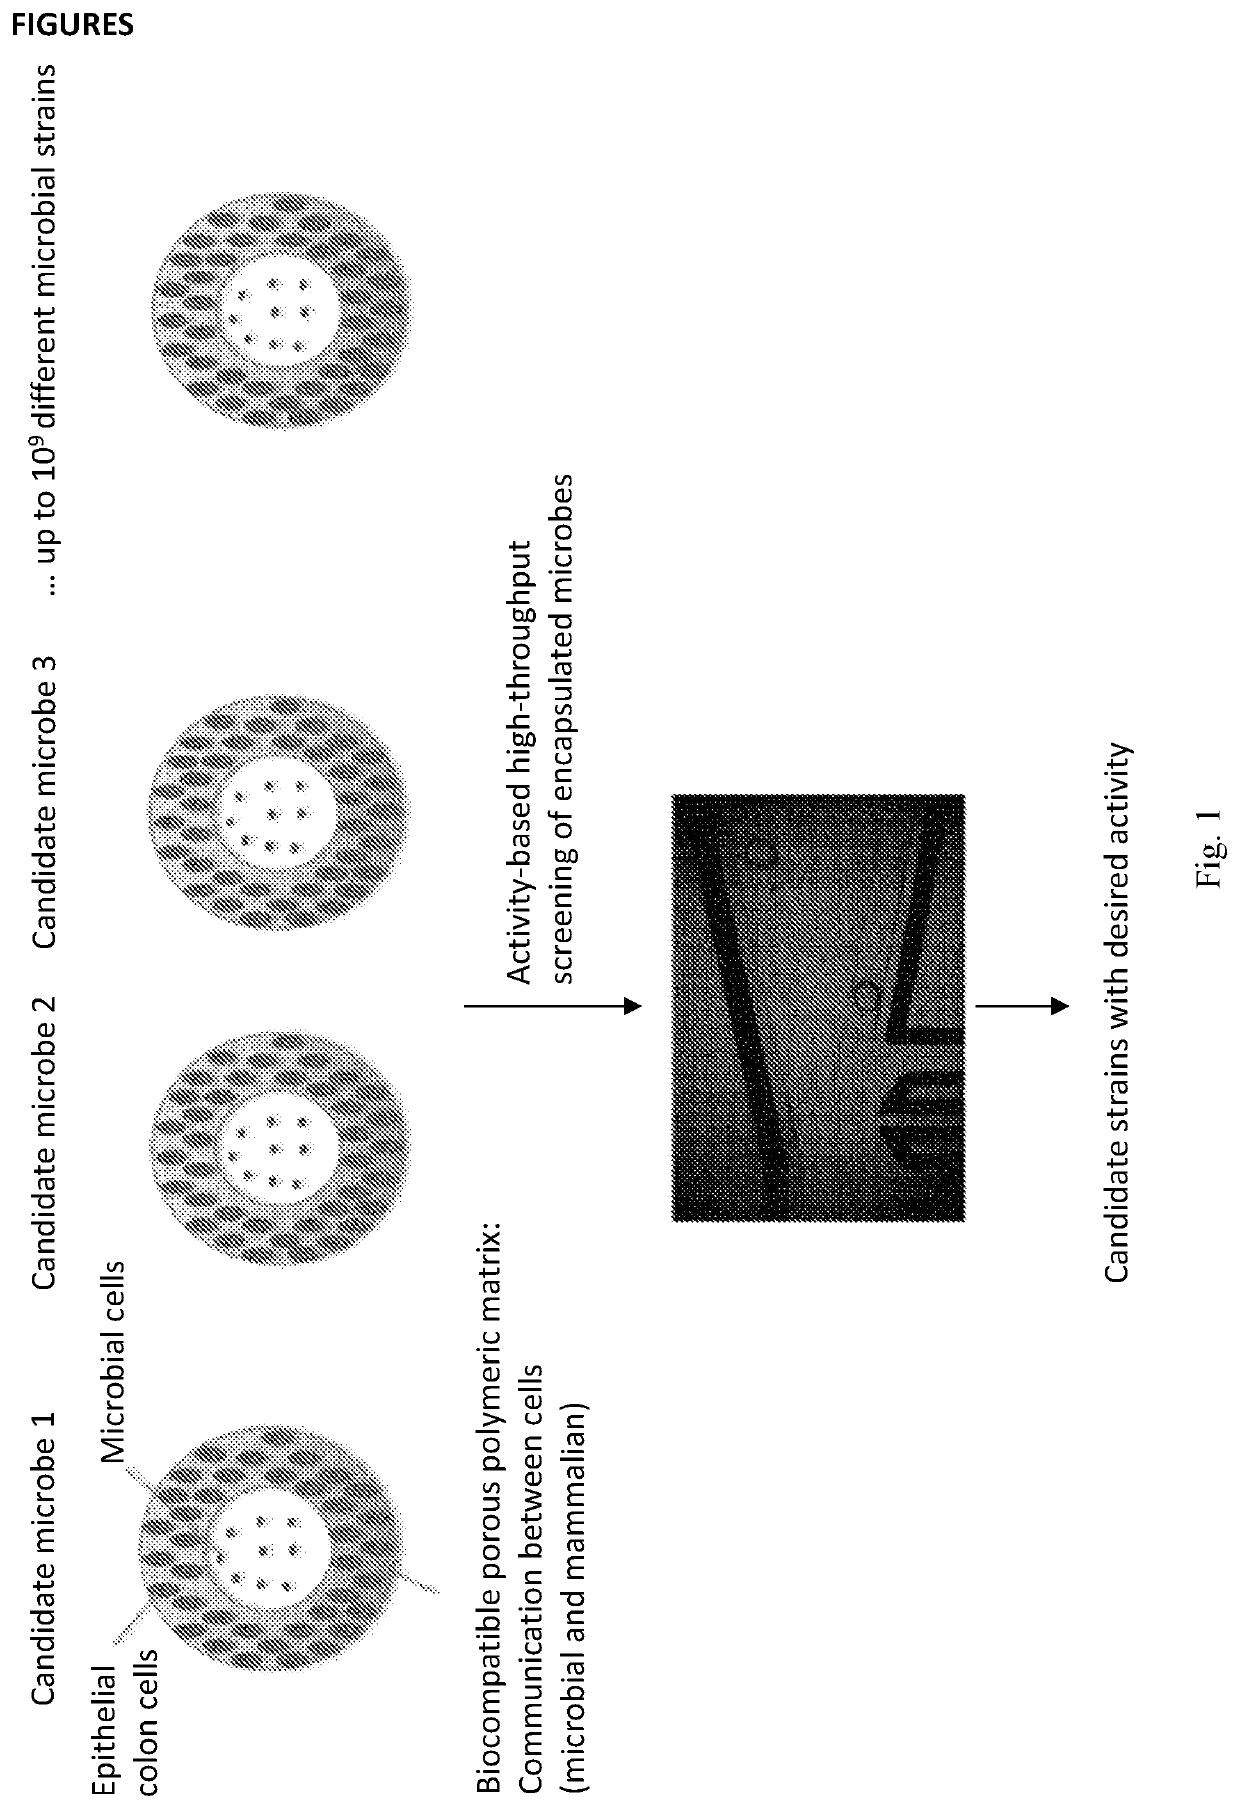 Microparticle for cultivating and testing cells